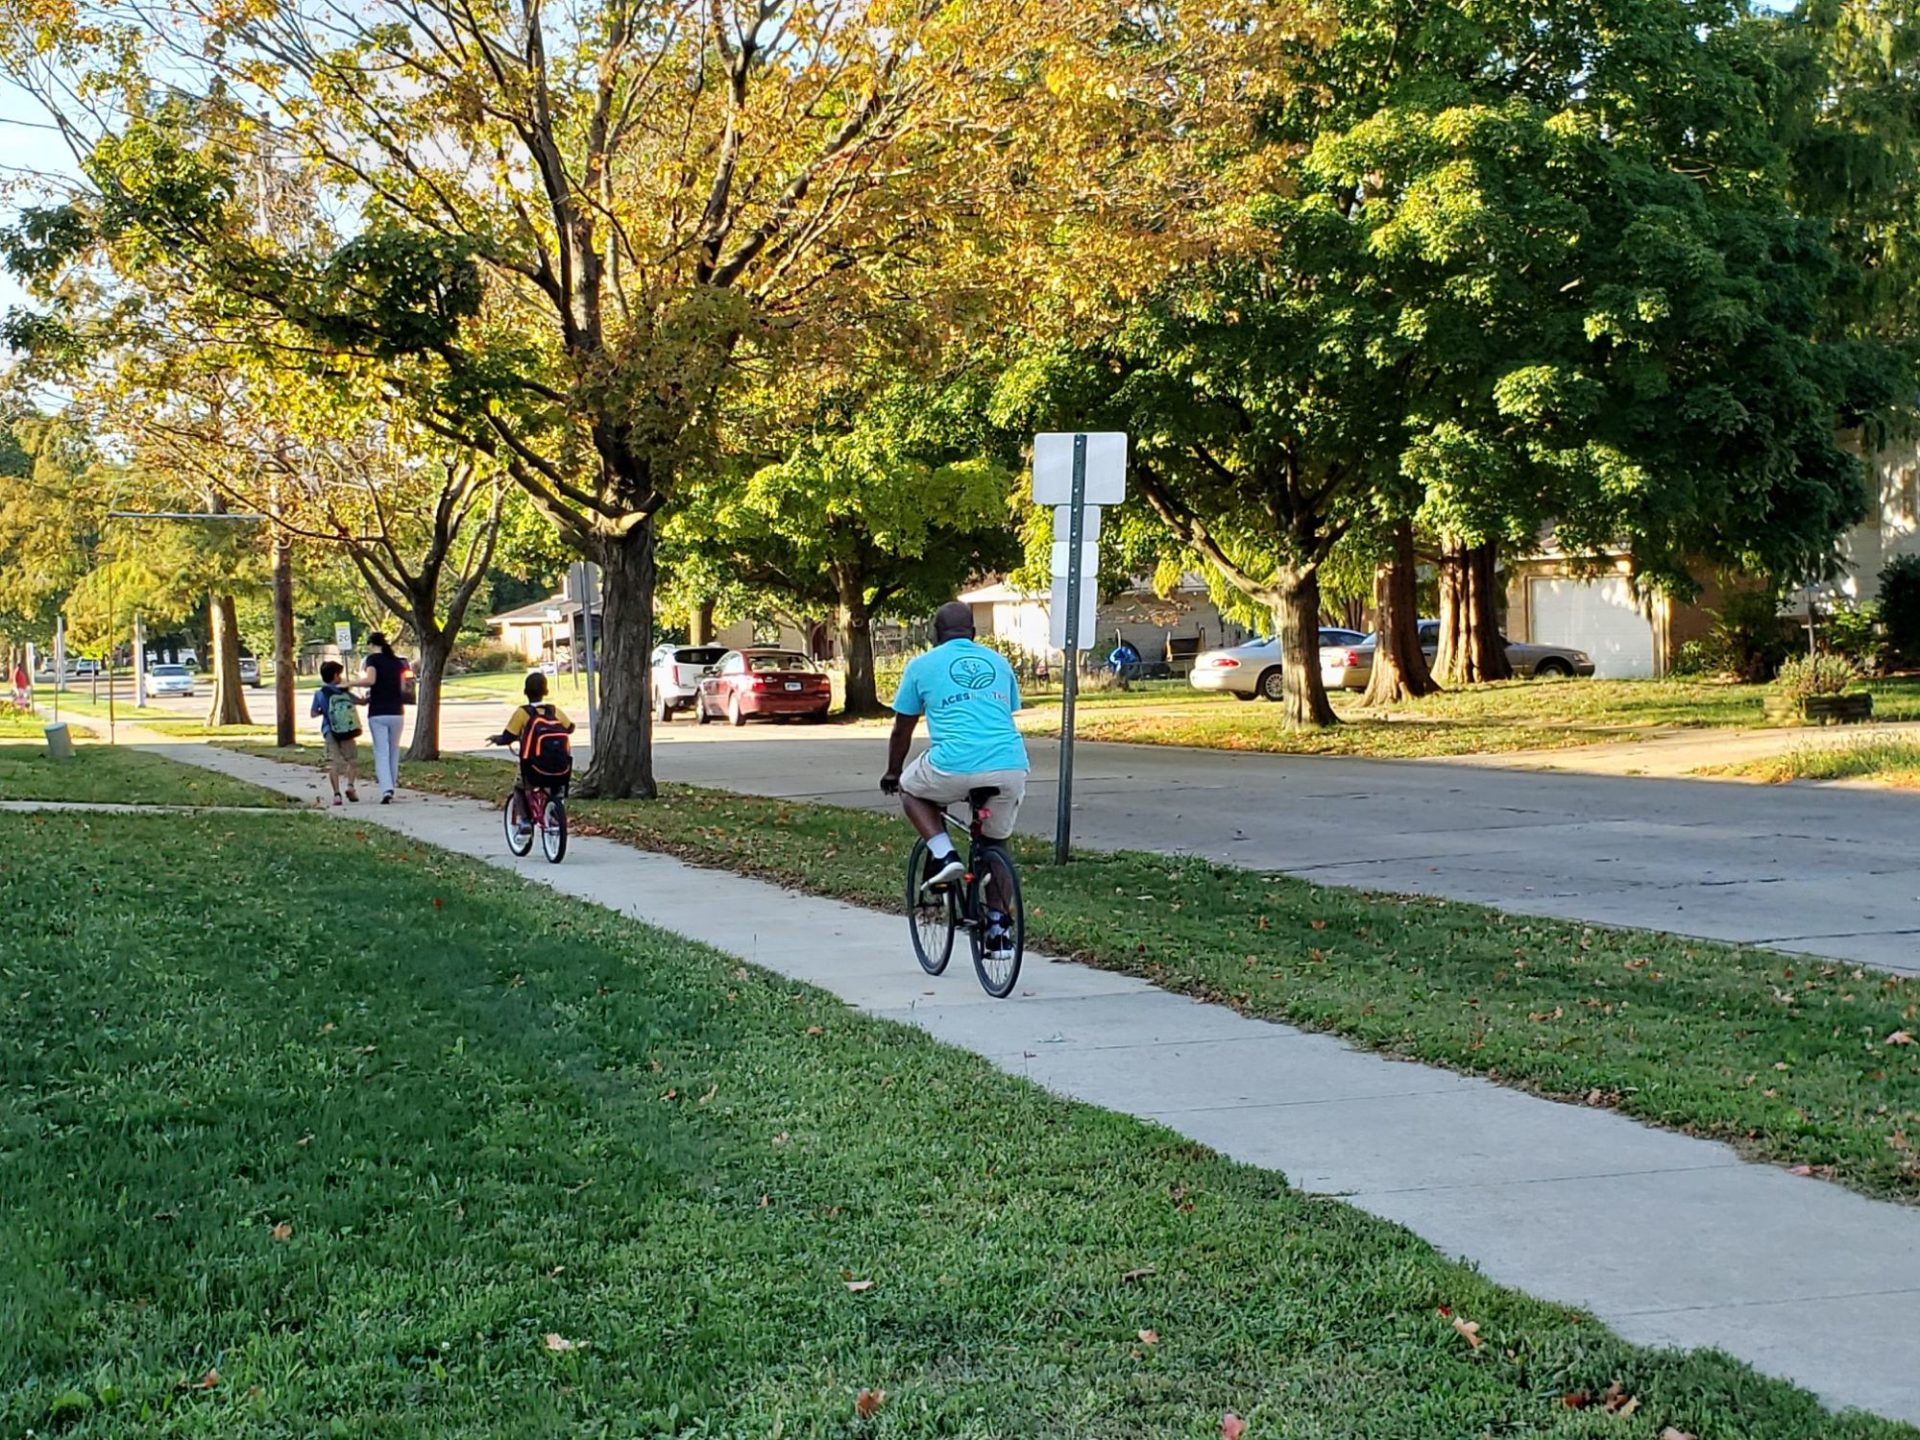 An adult and an child are on bikes, riding down a sidewalk in a tree-lined neighborhood road.